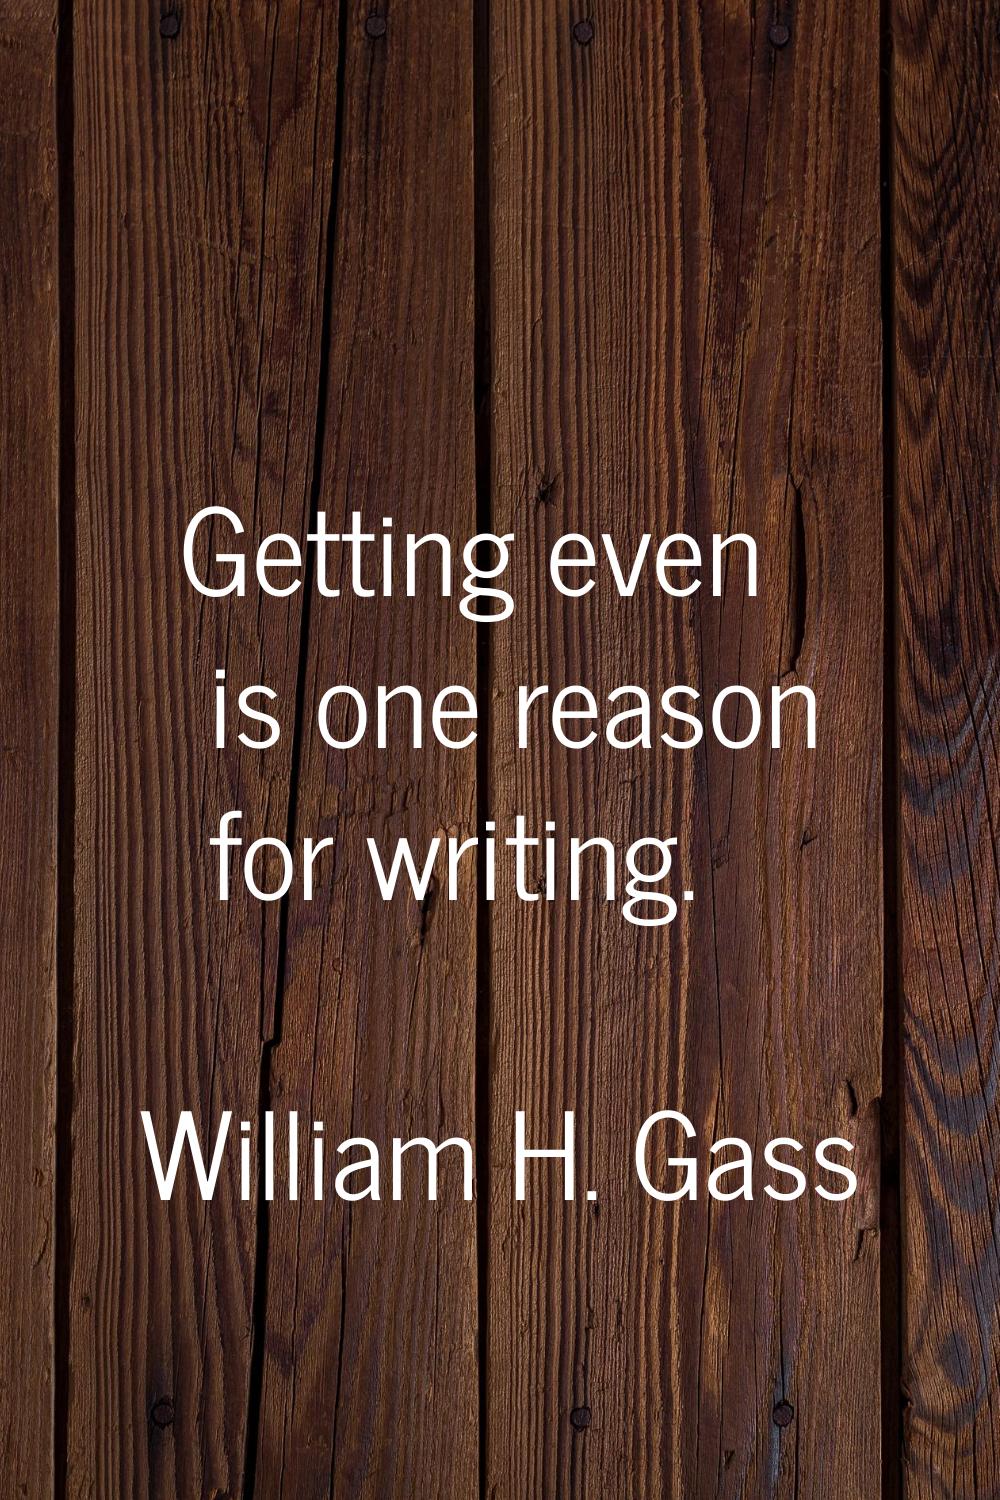 Getting even is one reason for writing.